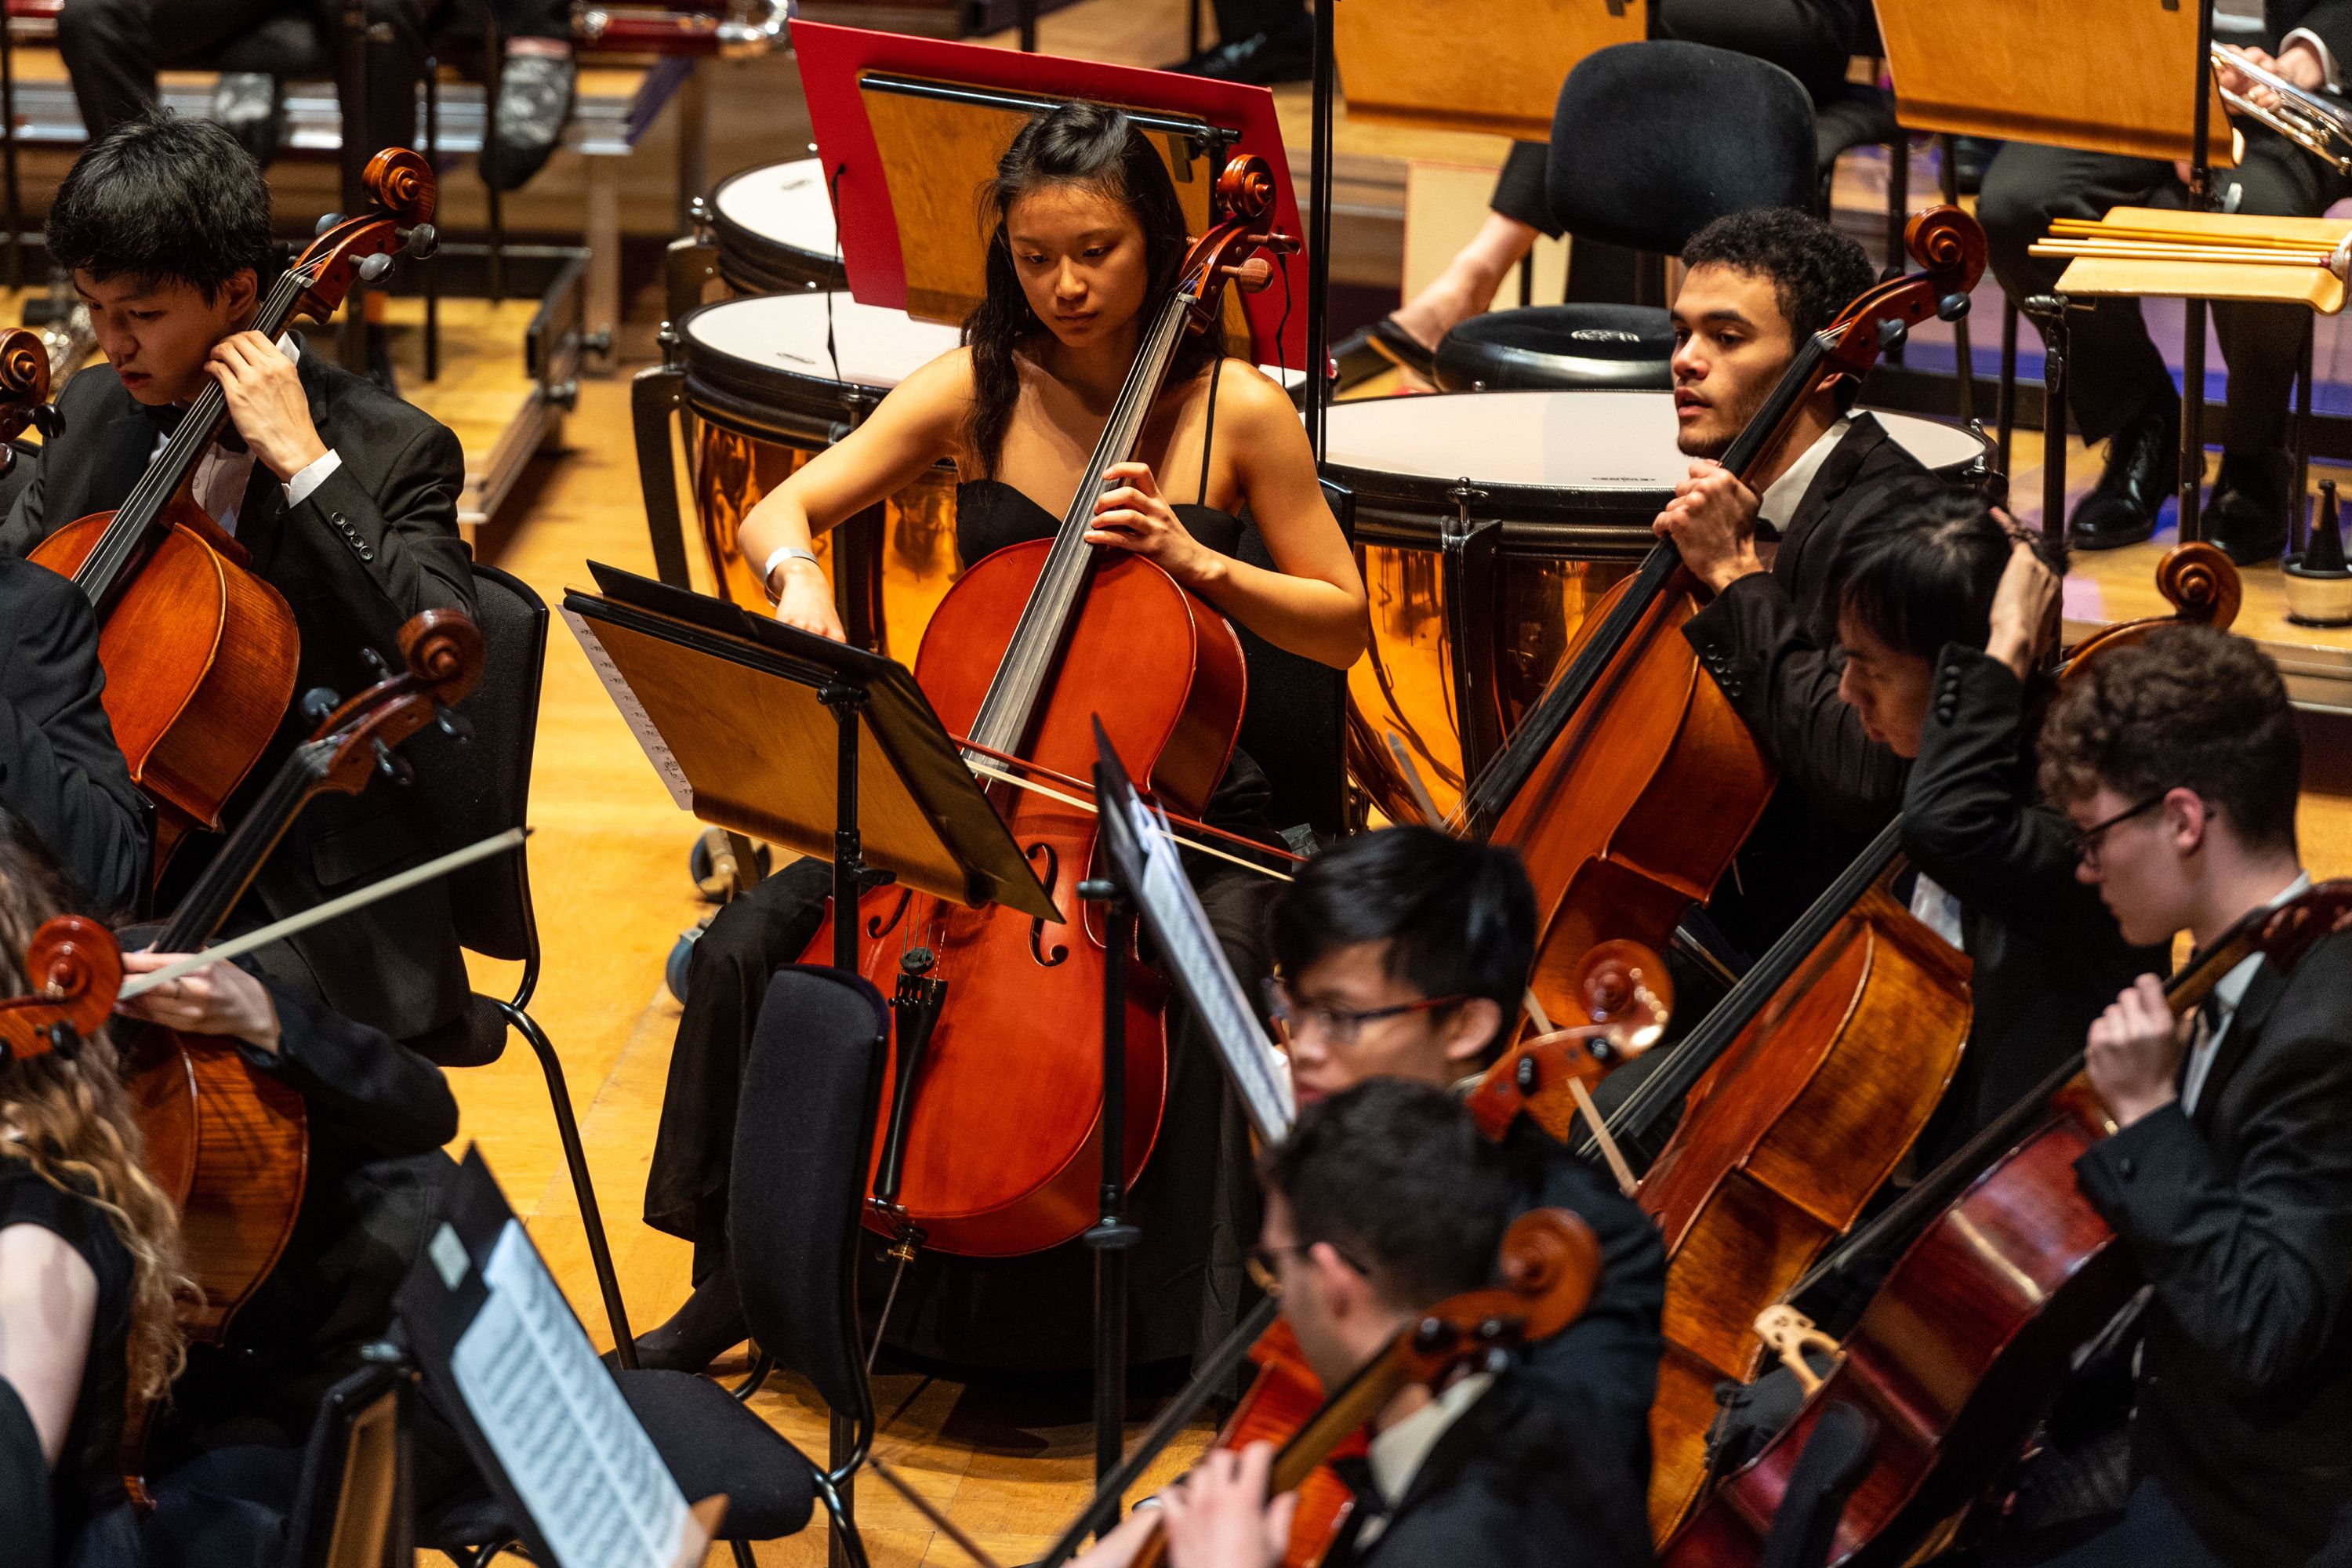 A shot of student cellists in formal attire playing in an orchestra